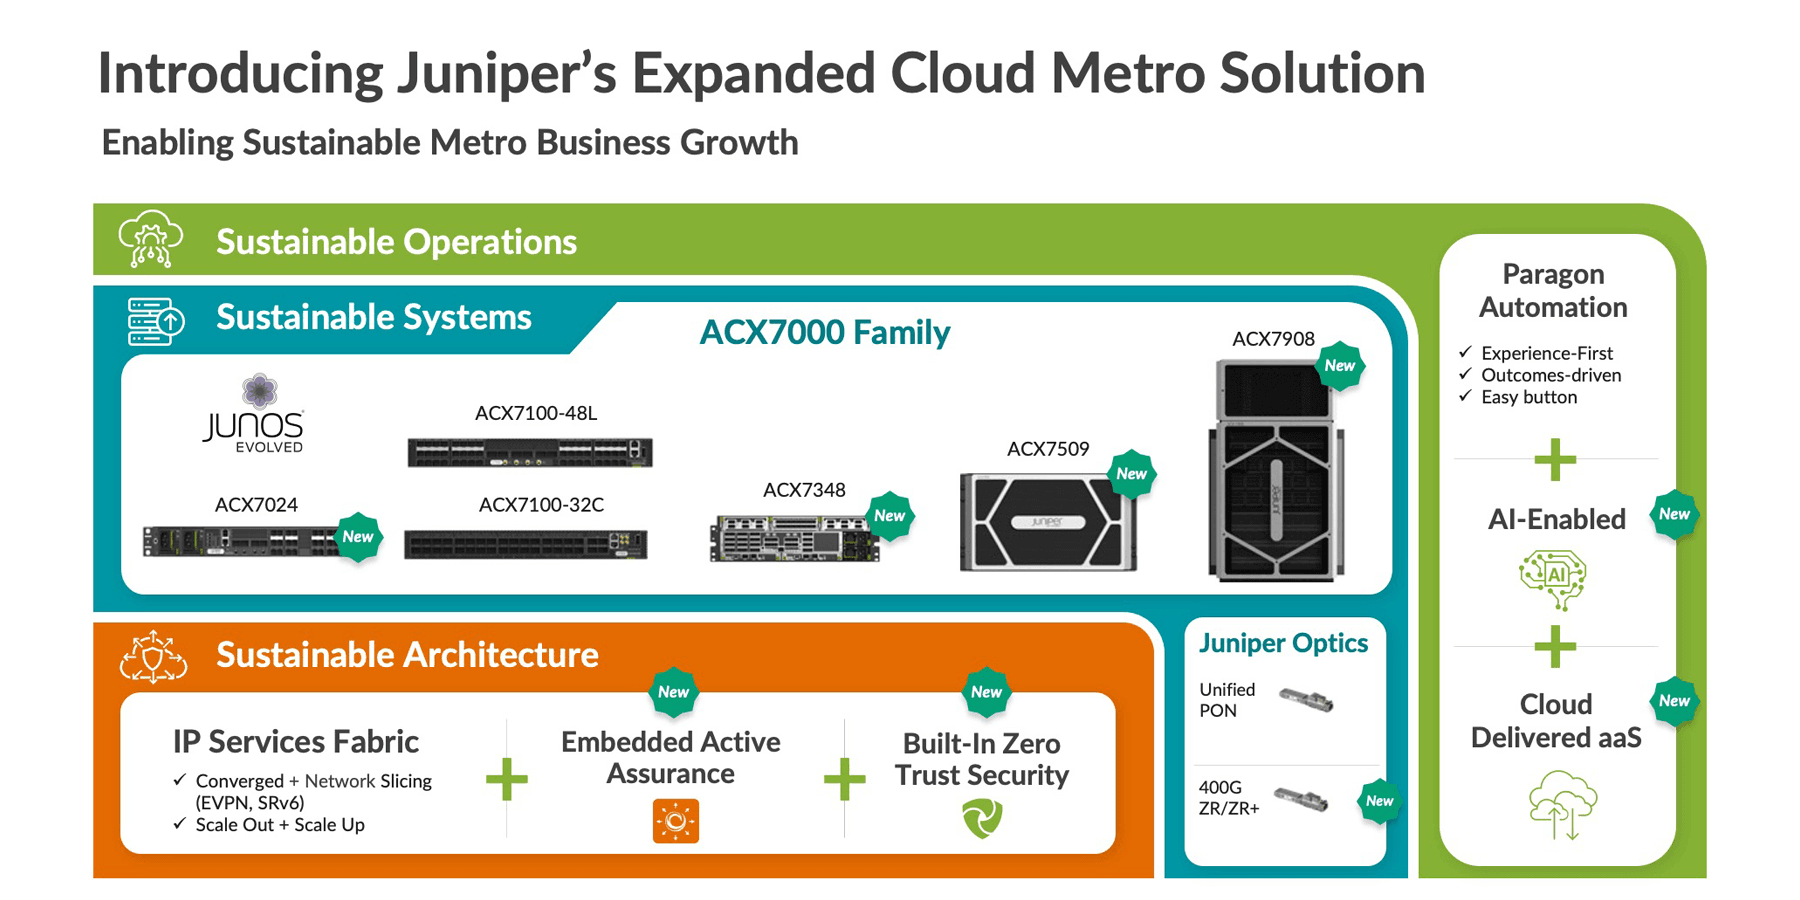 Reimagining Metro Architectures for the Experience-First Era